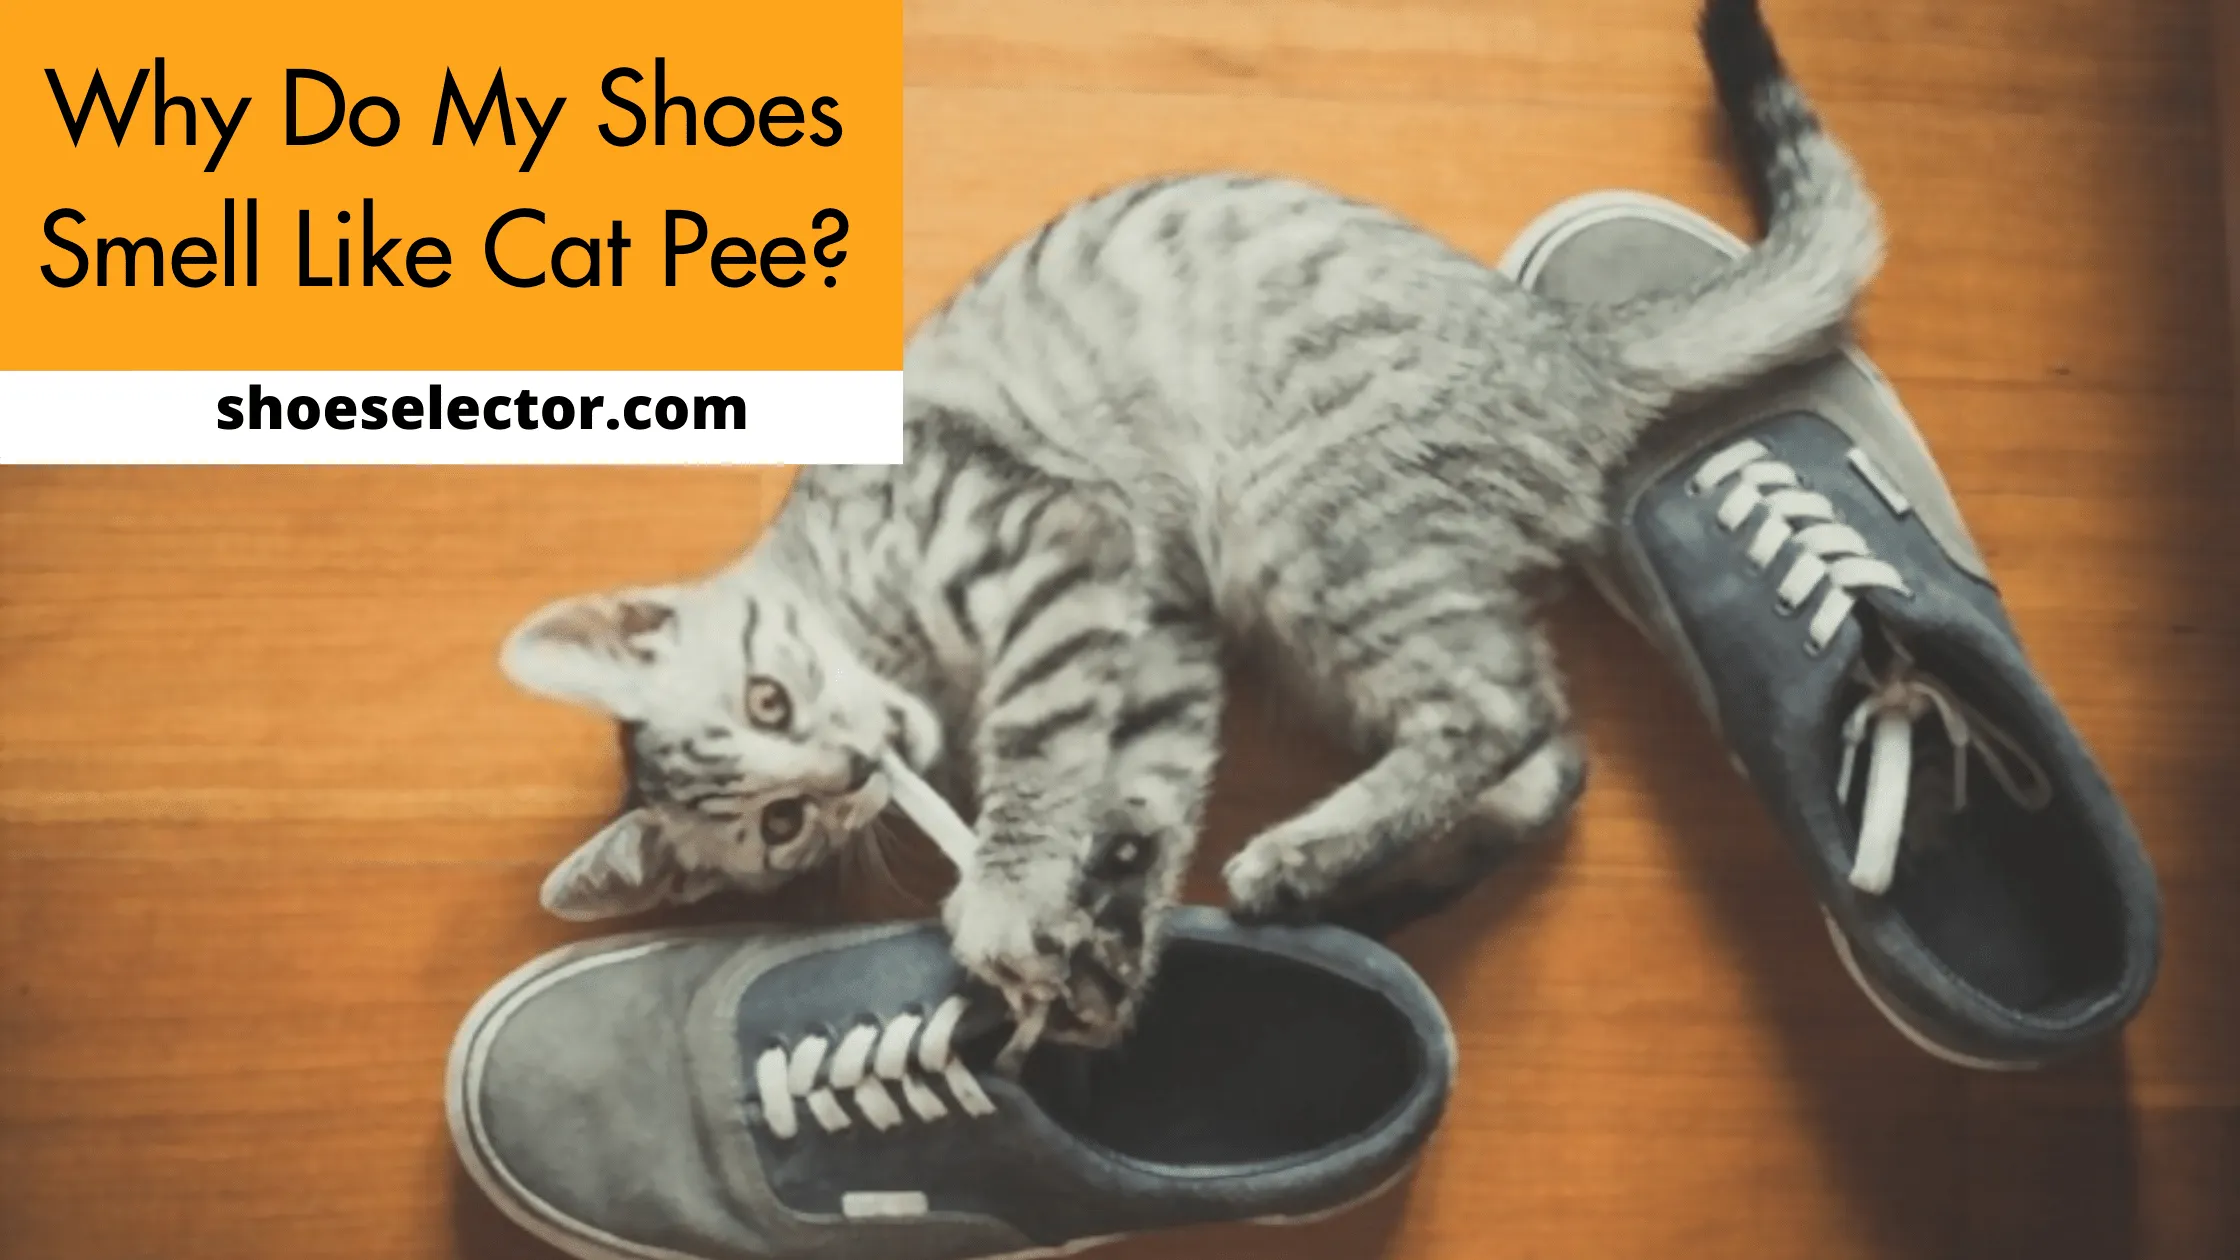 Why Do My Shoes Smell Like Cat Pee? - Easy Guide